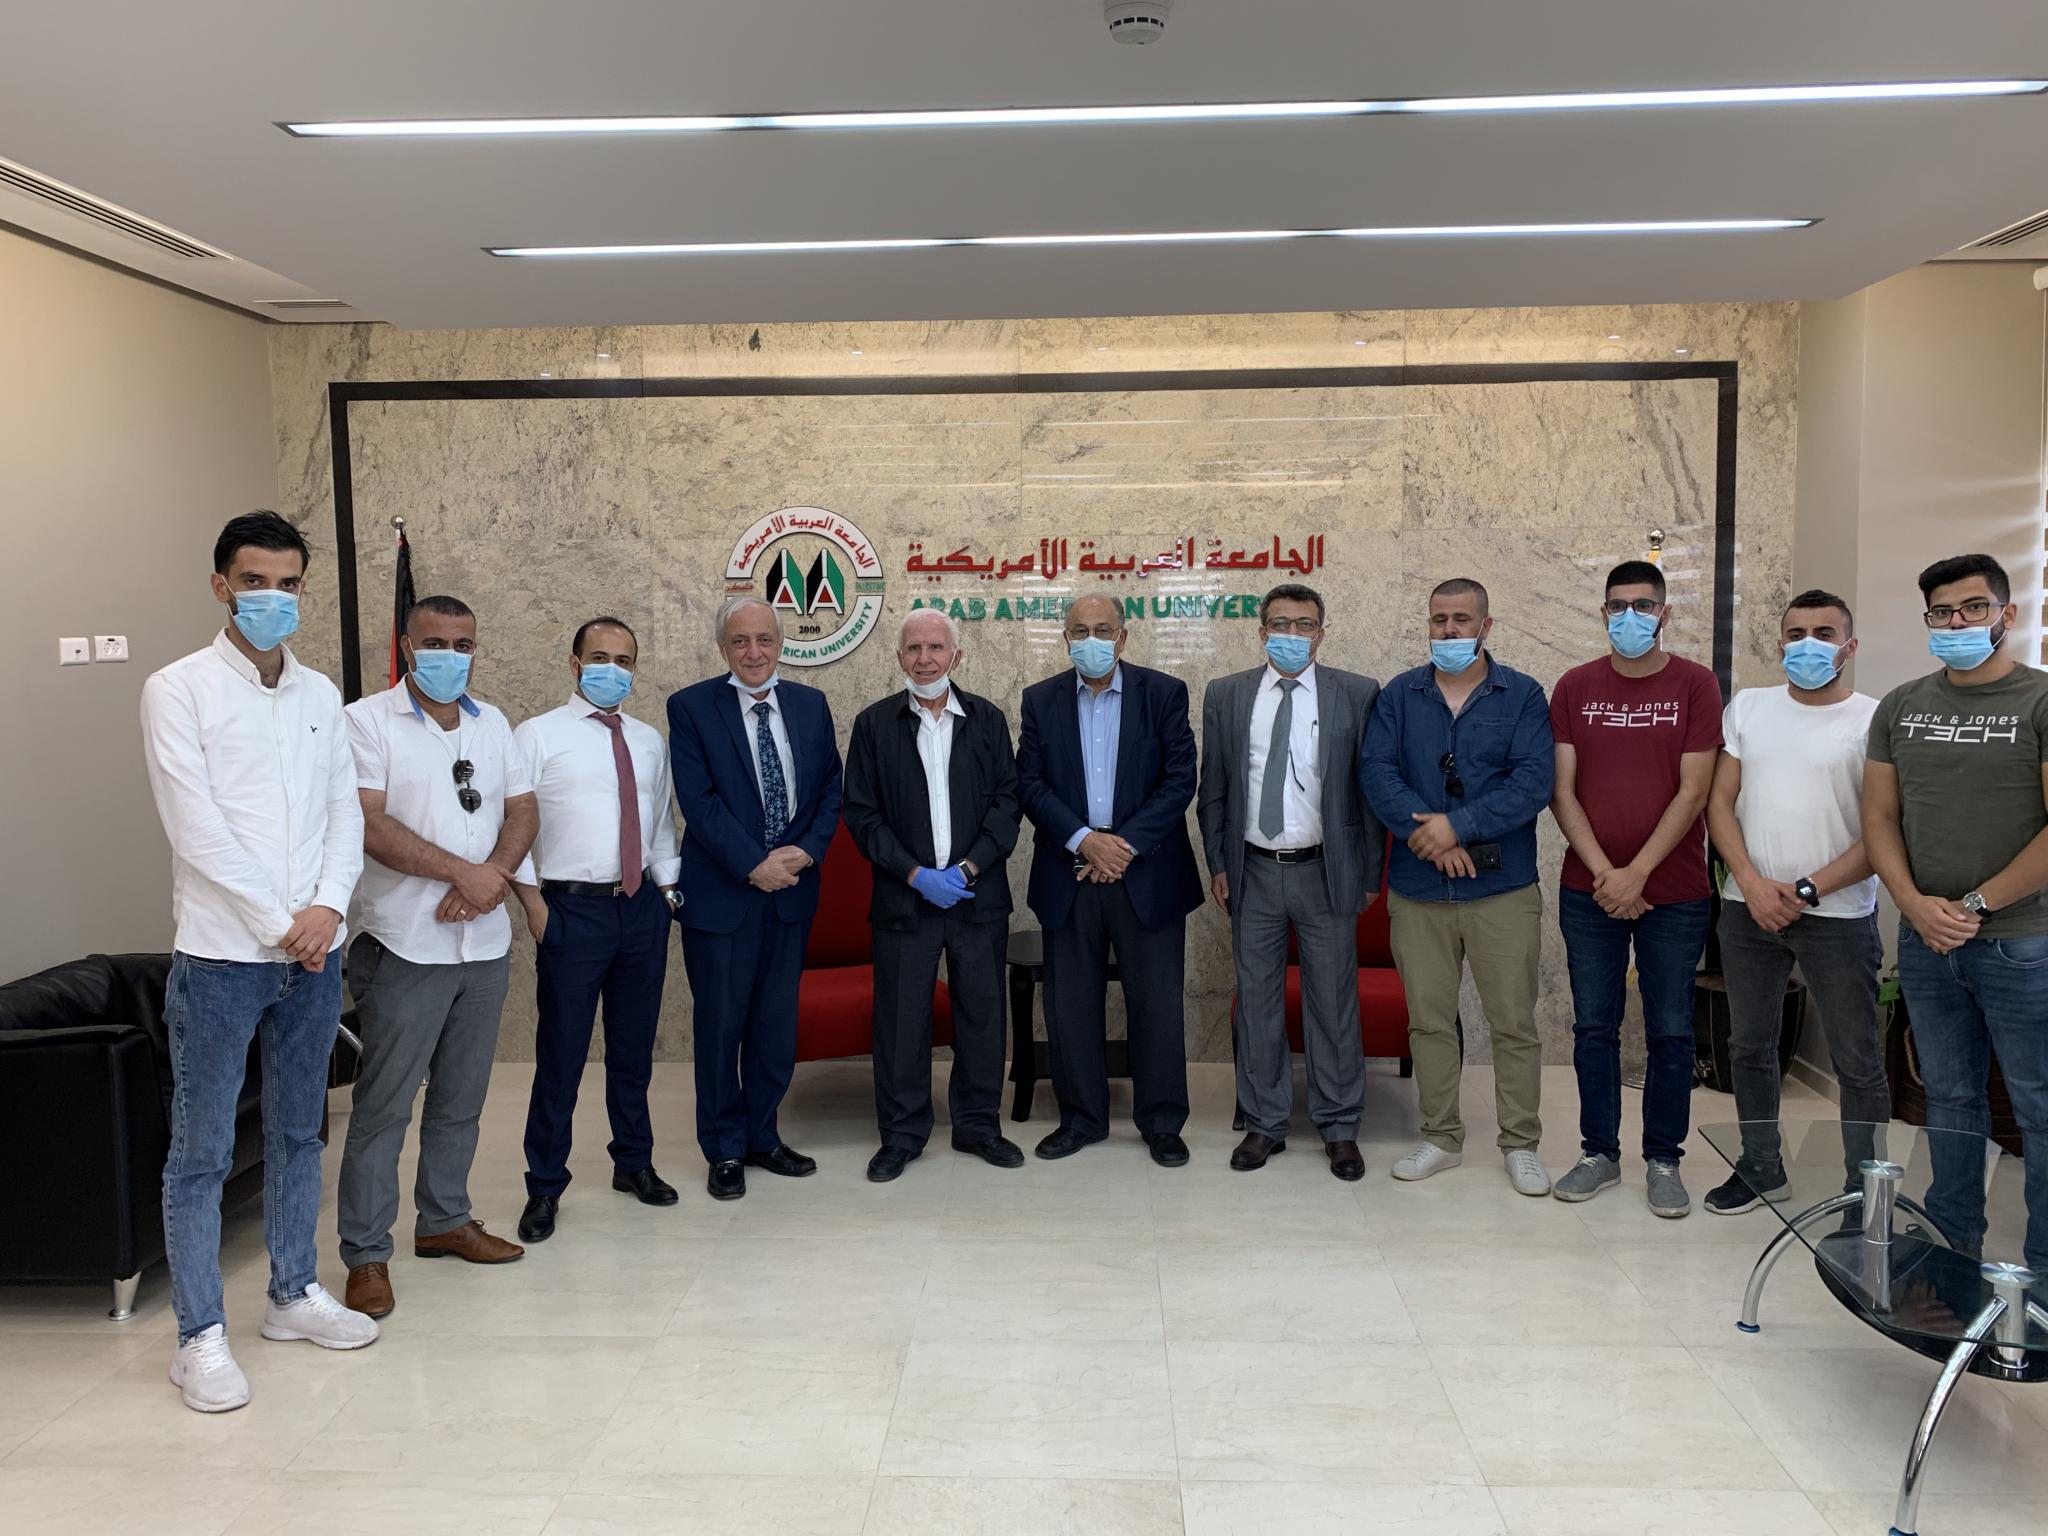 Azzam Al-ahmad- the Member of the Executive Committee of the Palestinian Liberation Organization and Fatah Central Committee Visits Arab American University